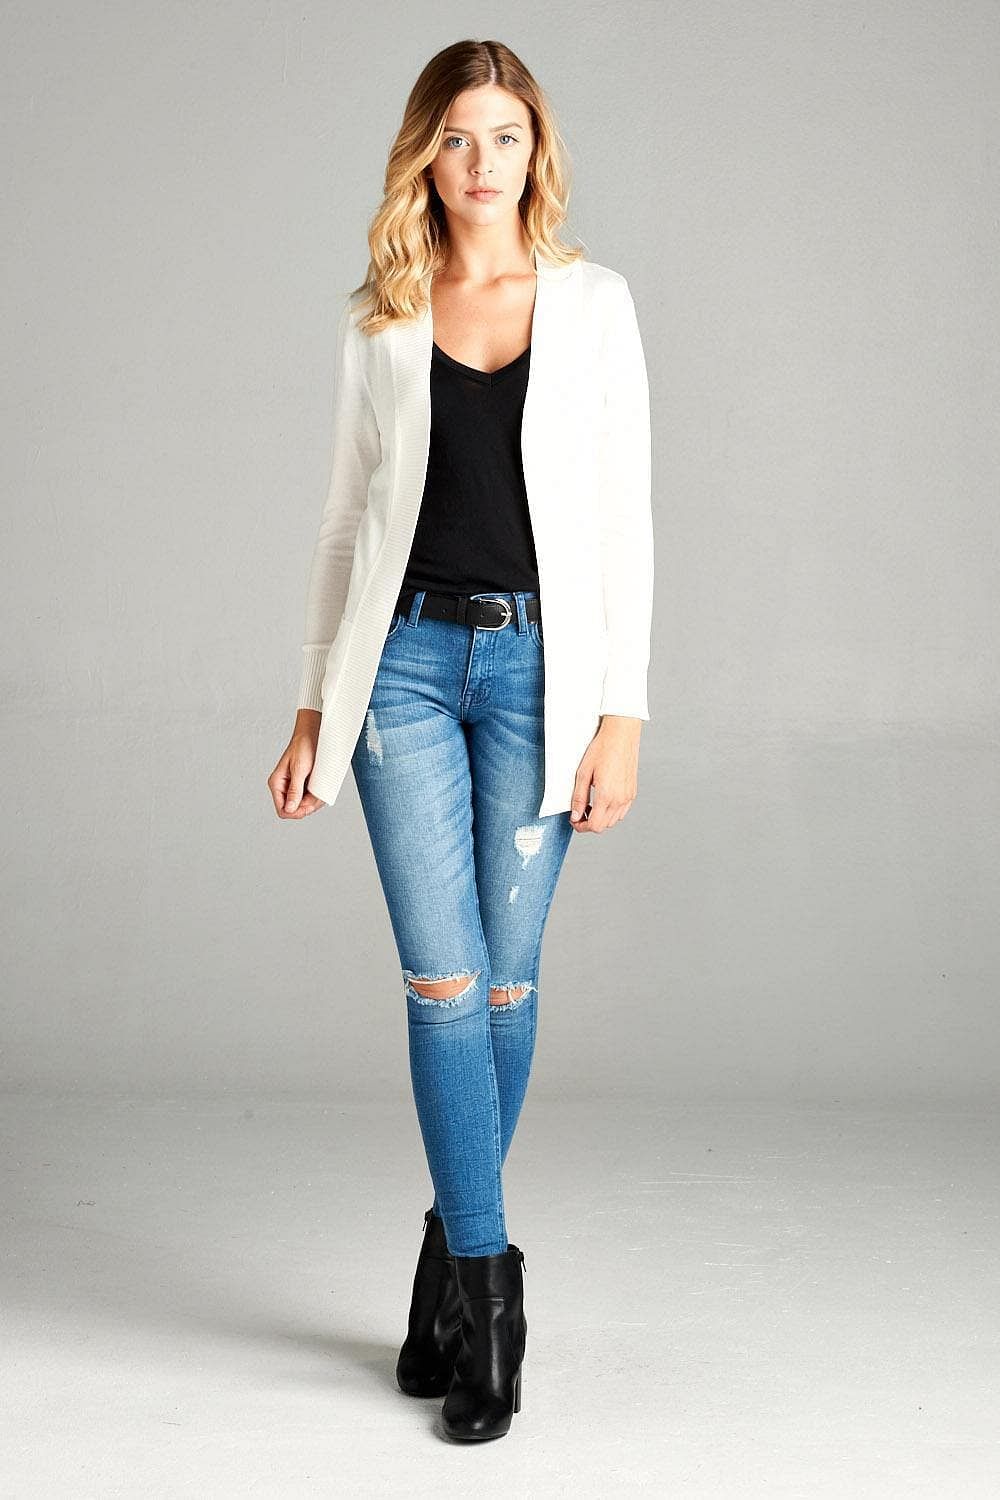 White Long Sleeve Open Front Rib knit Cardigan - Shopping Therapy, LLC Cardigan